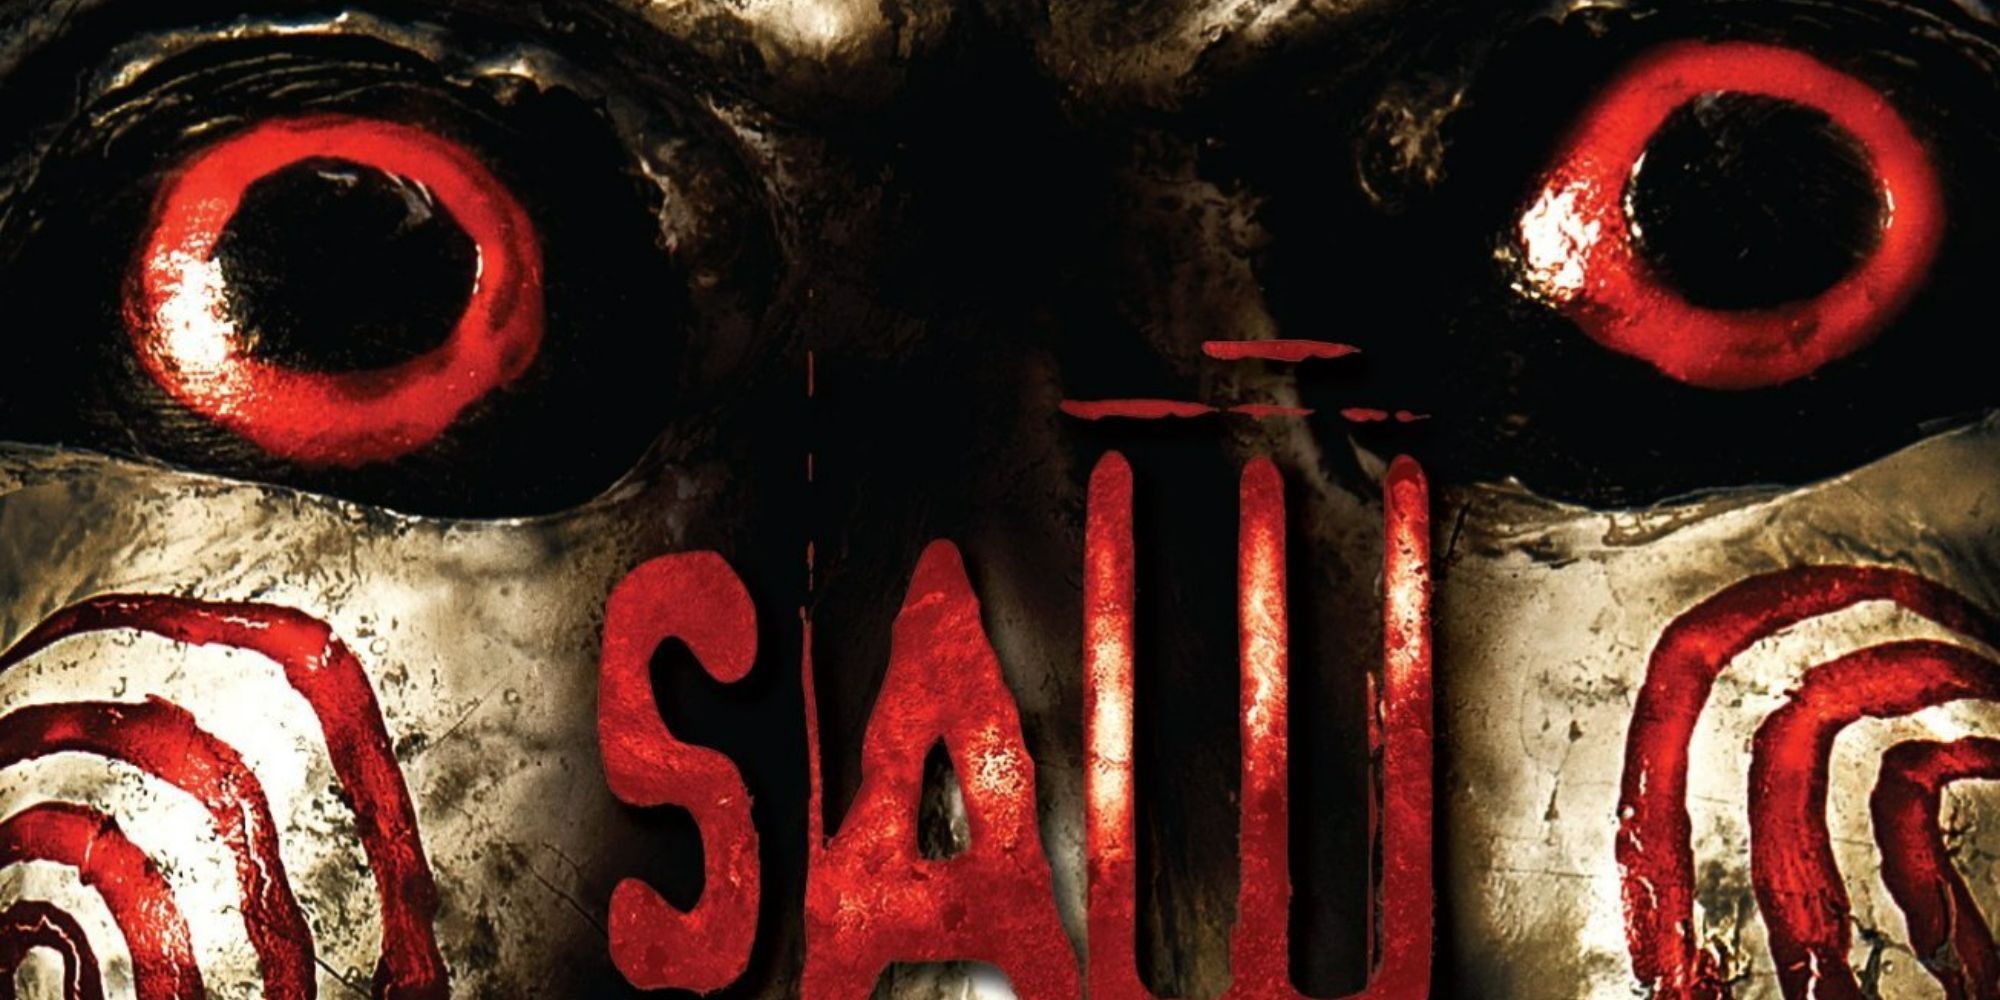 The cover of the Saw video game featuring Billy the doll